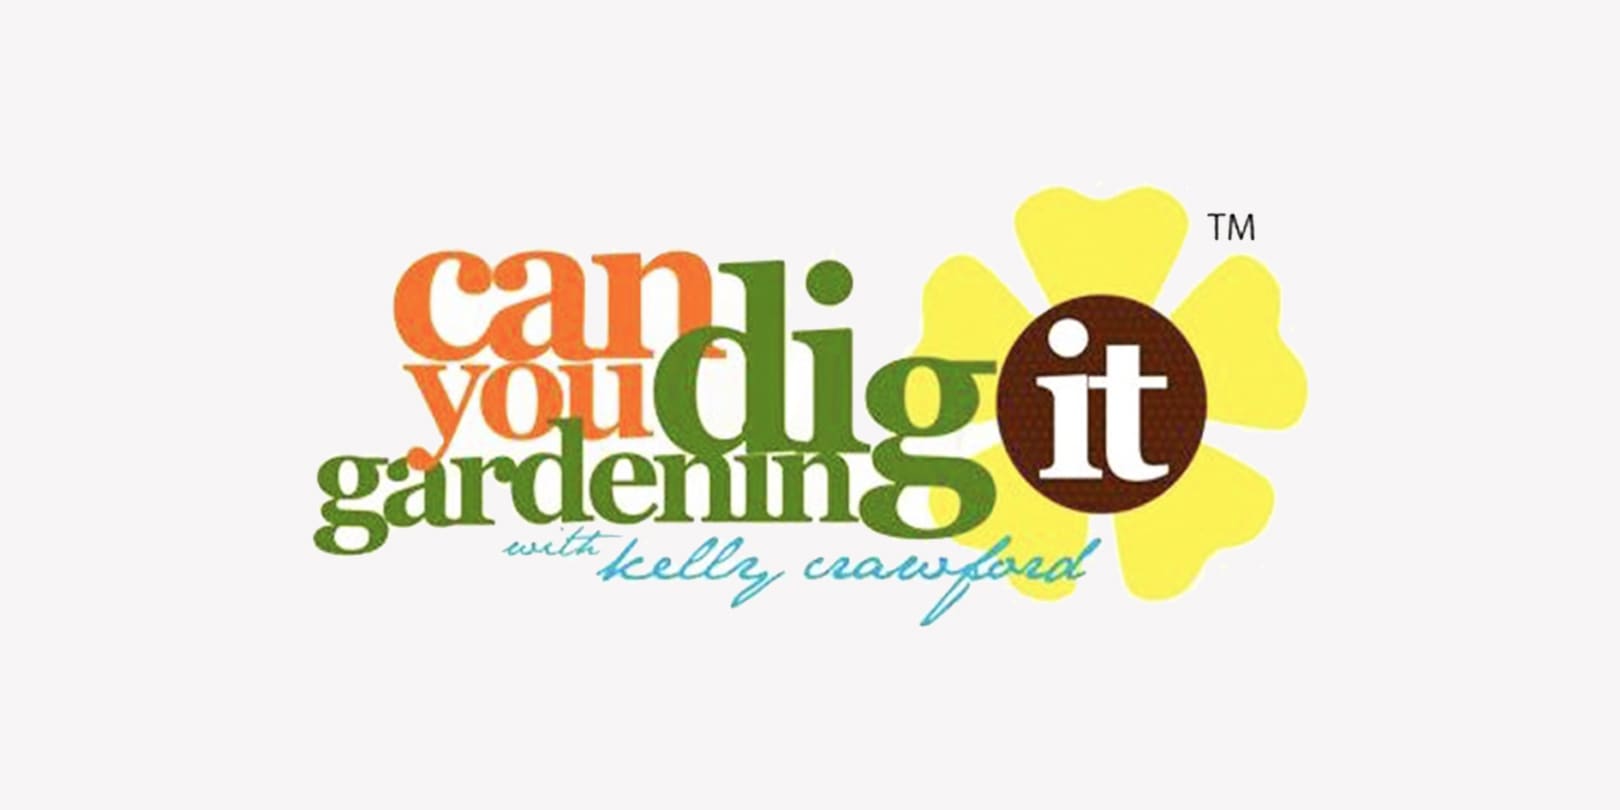 KELLY CRAWFORD’S CAN YOU DIG IT GARDENING AND CRESCENT ON NBC